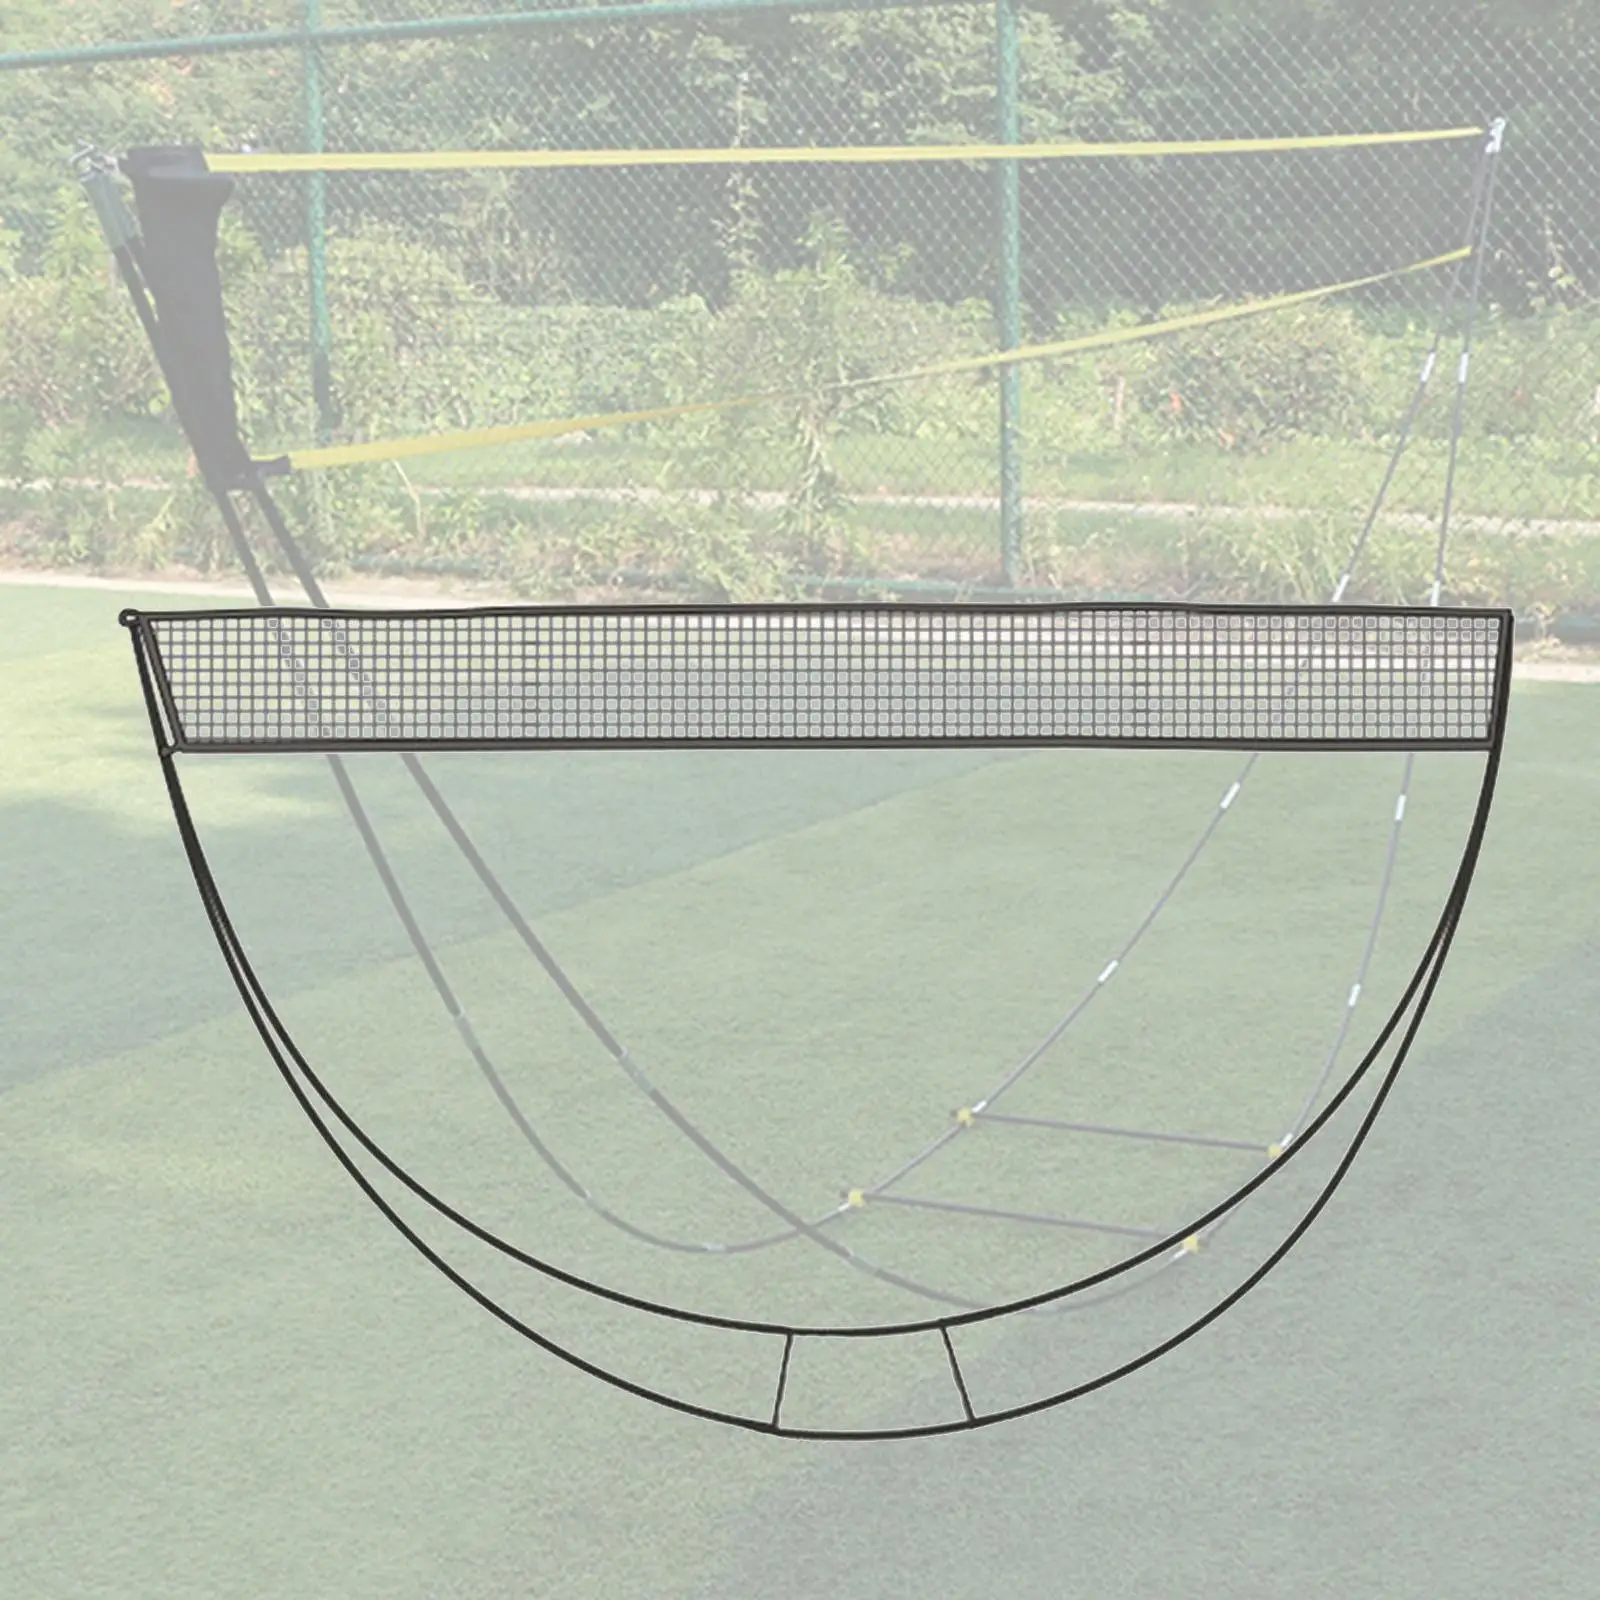 Portable Badminton Net Sets Easy Set Up with Foldable Stand for Street Beach